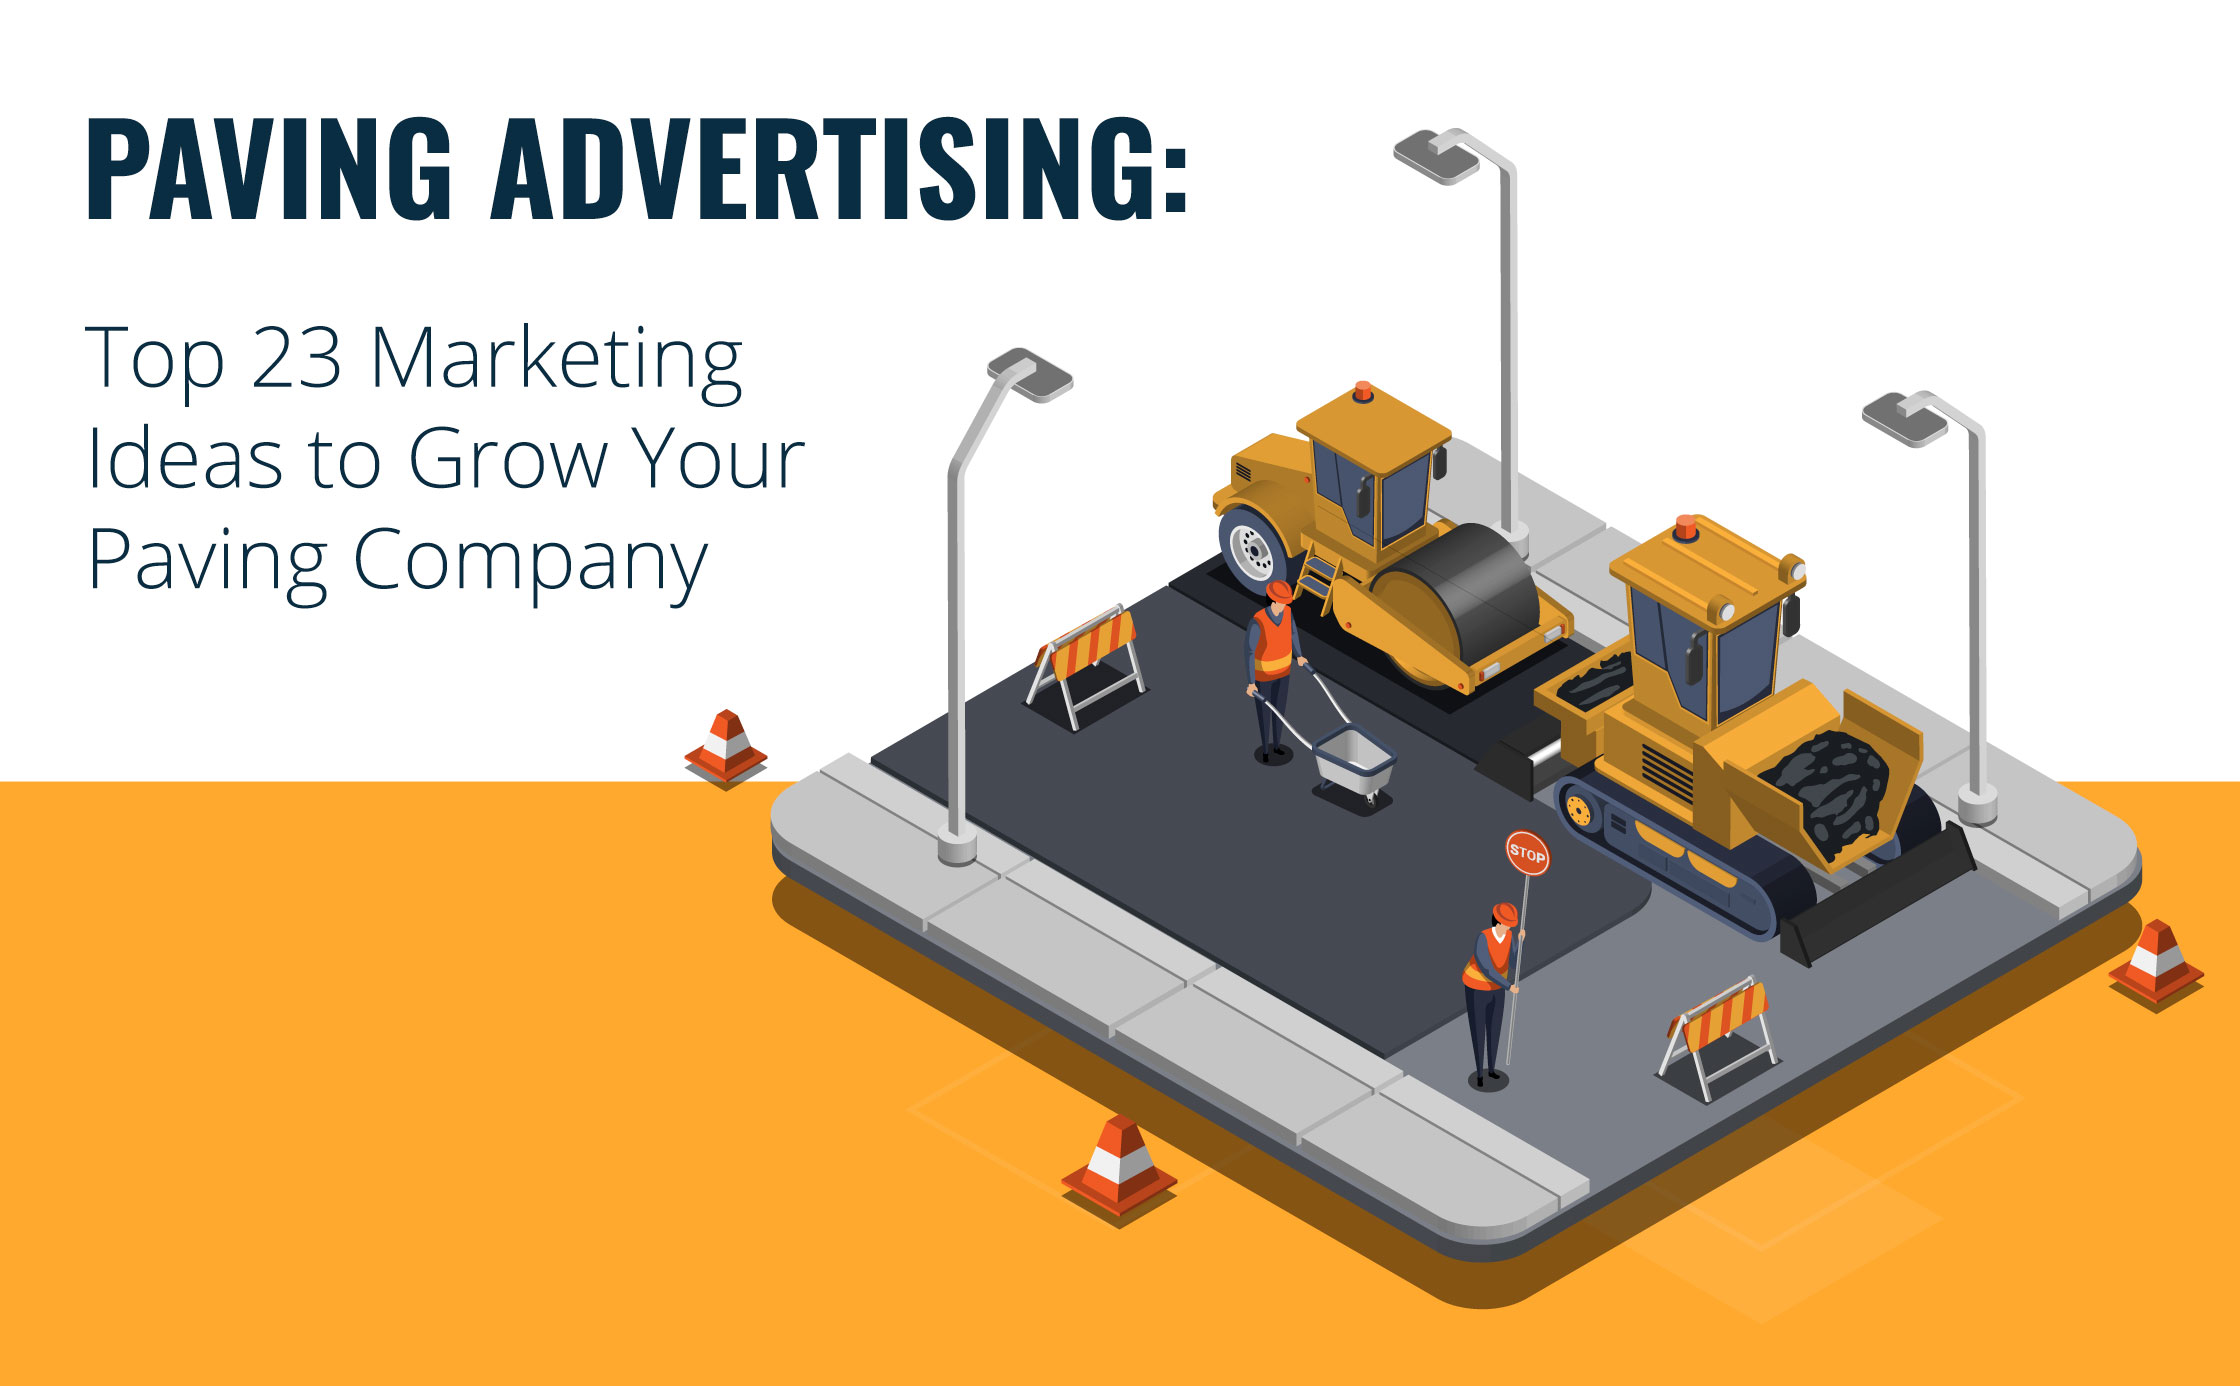 Top 23 Marketing Ideas to Grow Your Paving Company